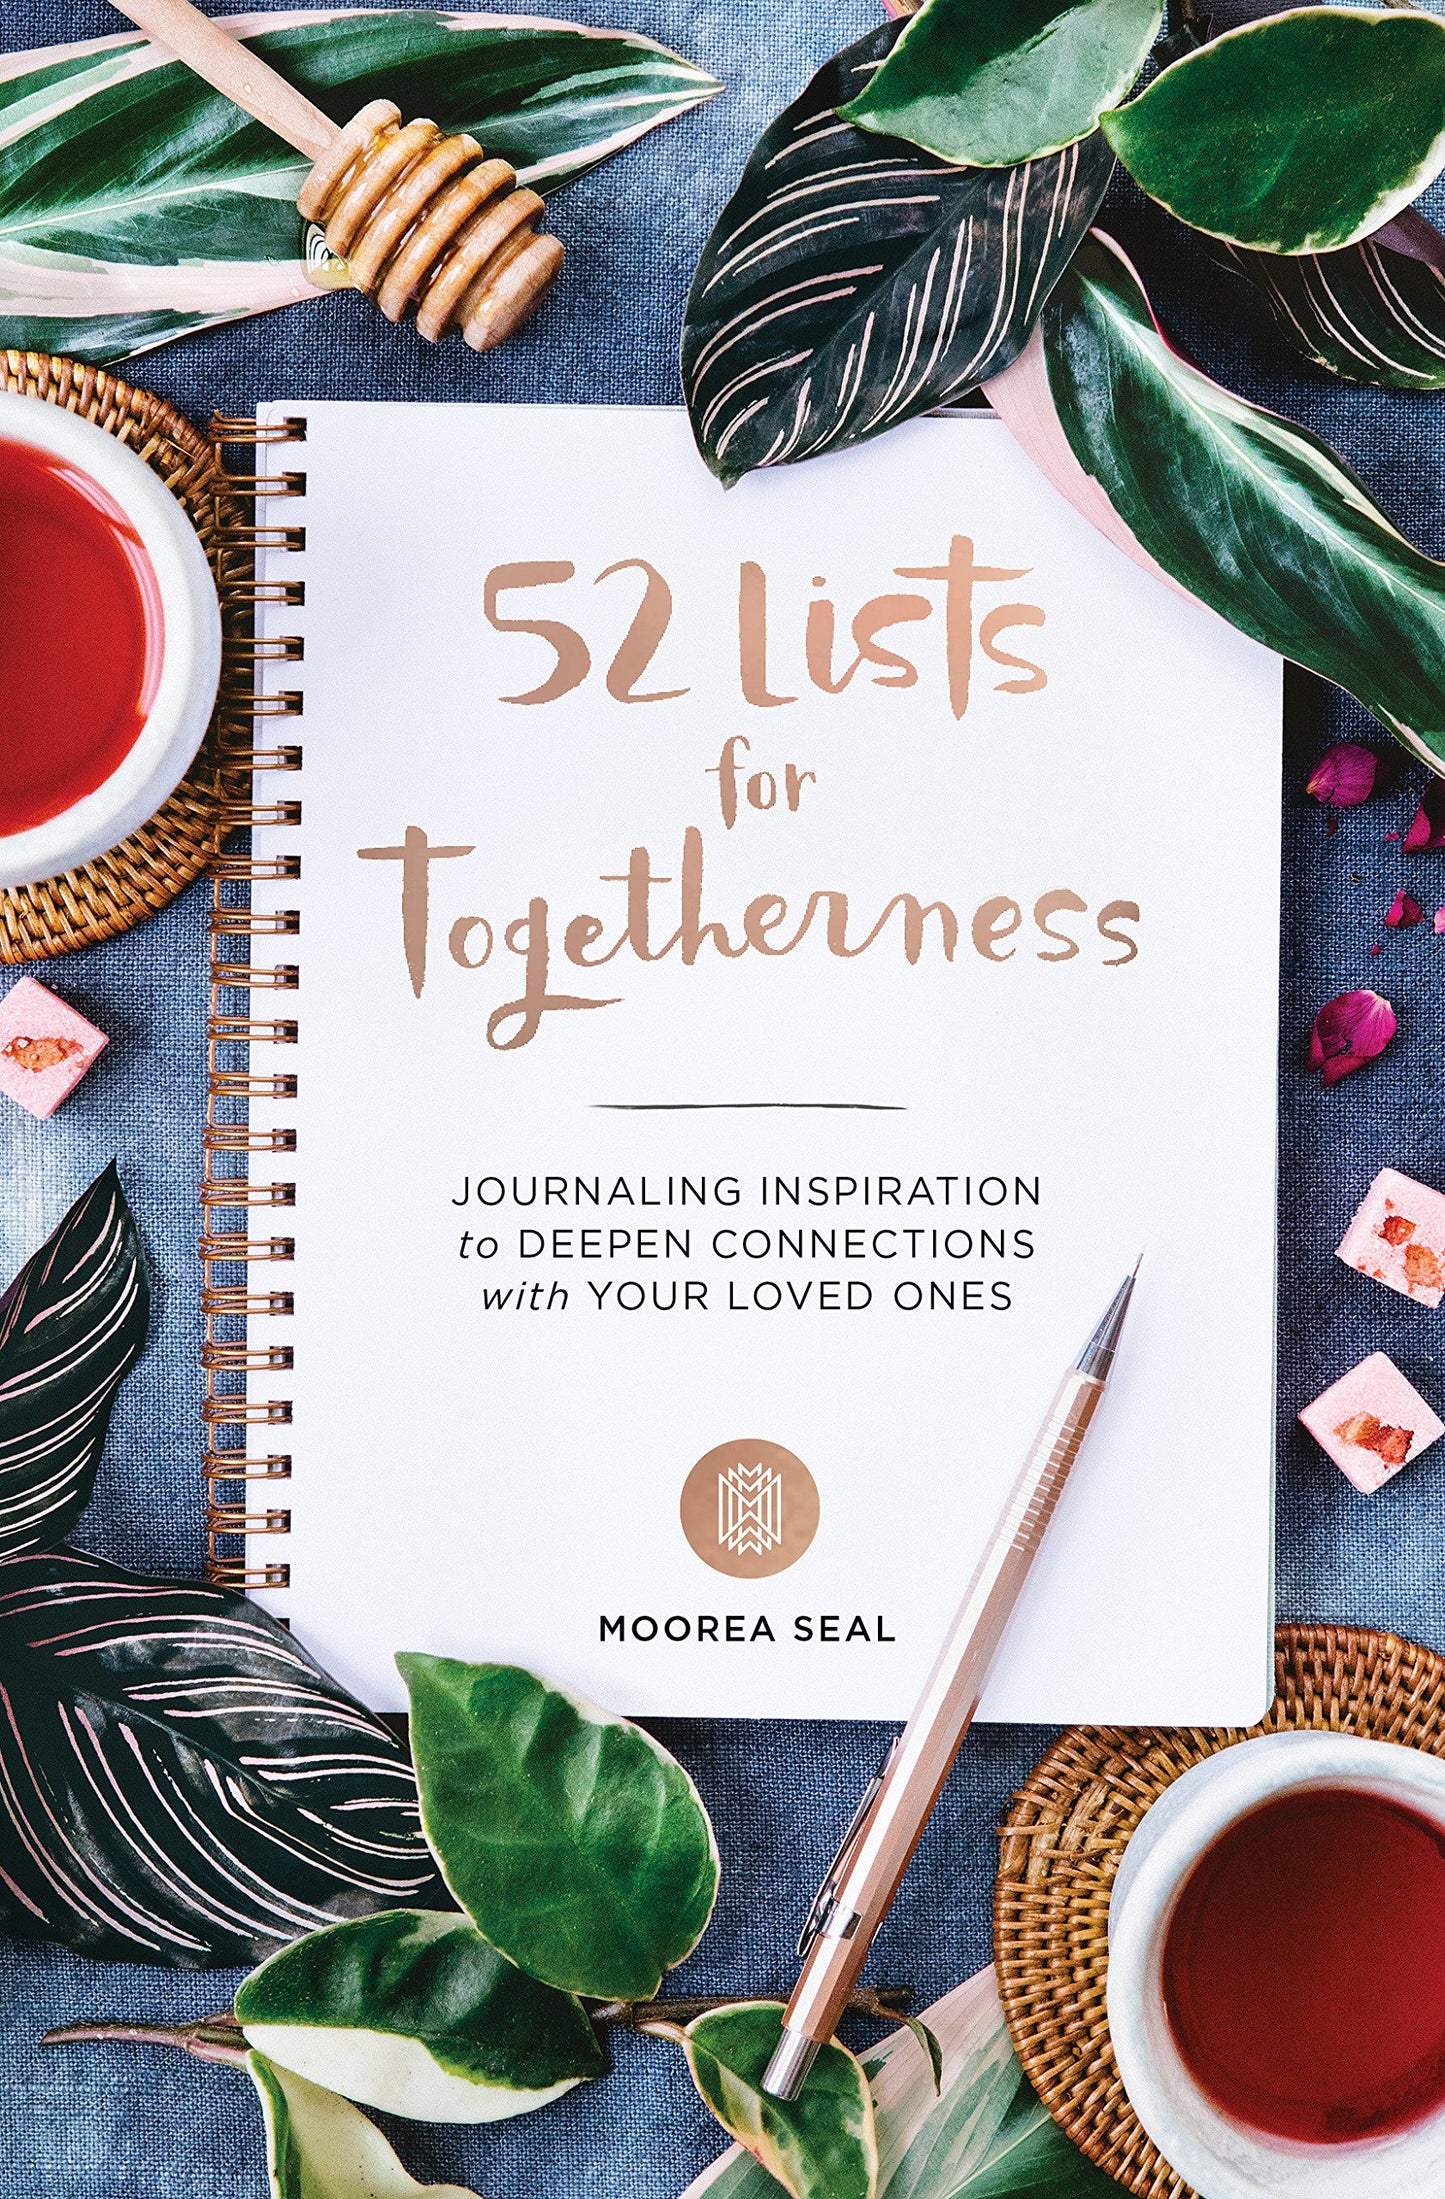 52 Lists of Togetherness - Journaling Inspiration to Deepen Connections with your Loved Ones